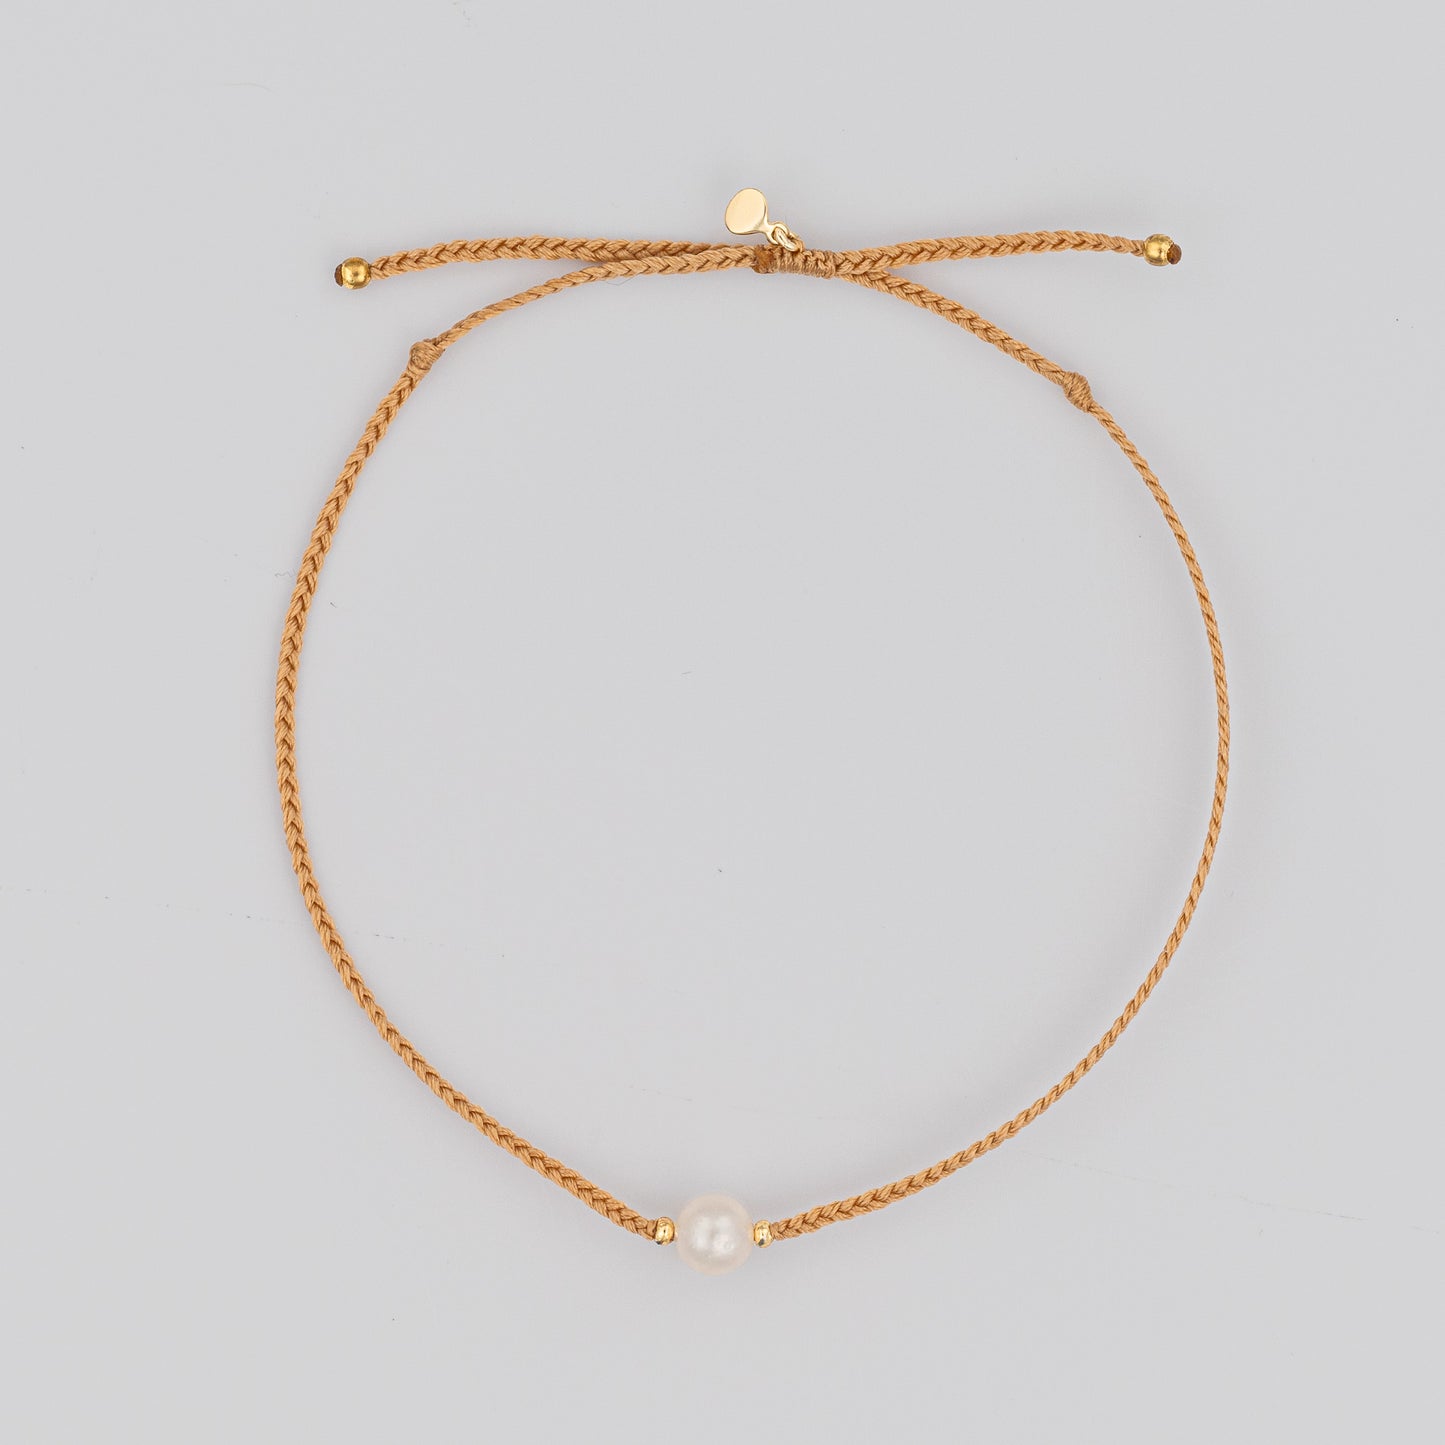 Single Pearl Bracelet on Woven Taupe Cord with Gold Accents